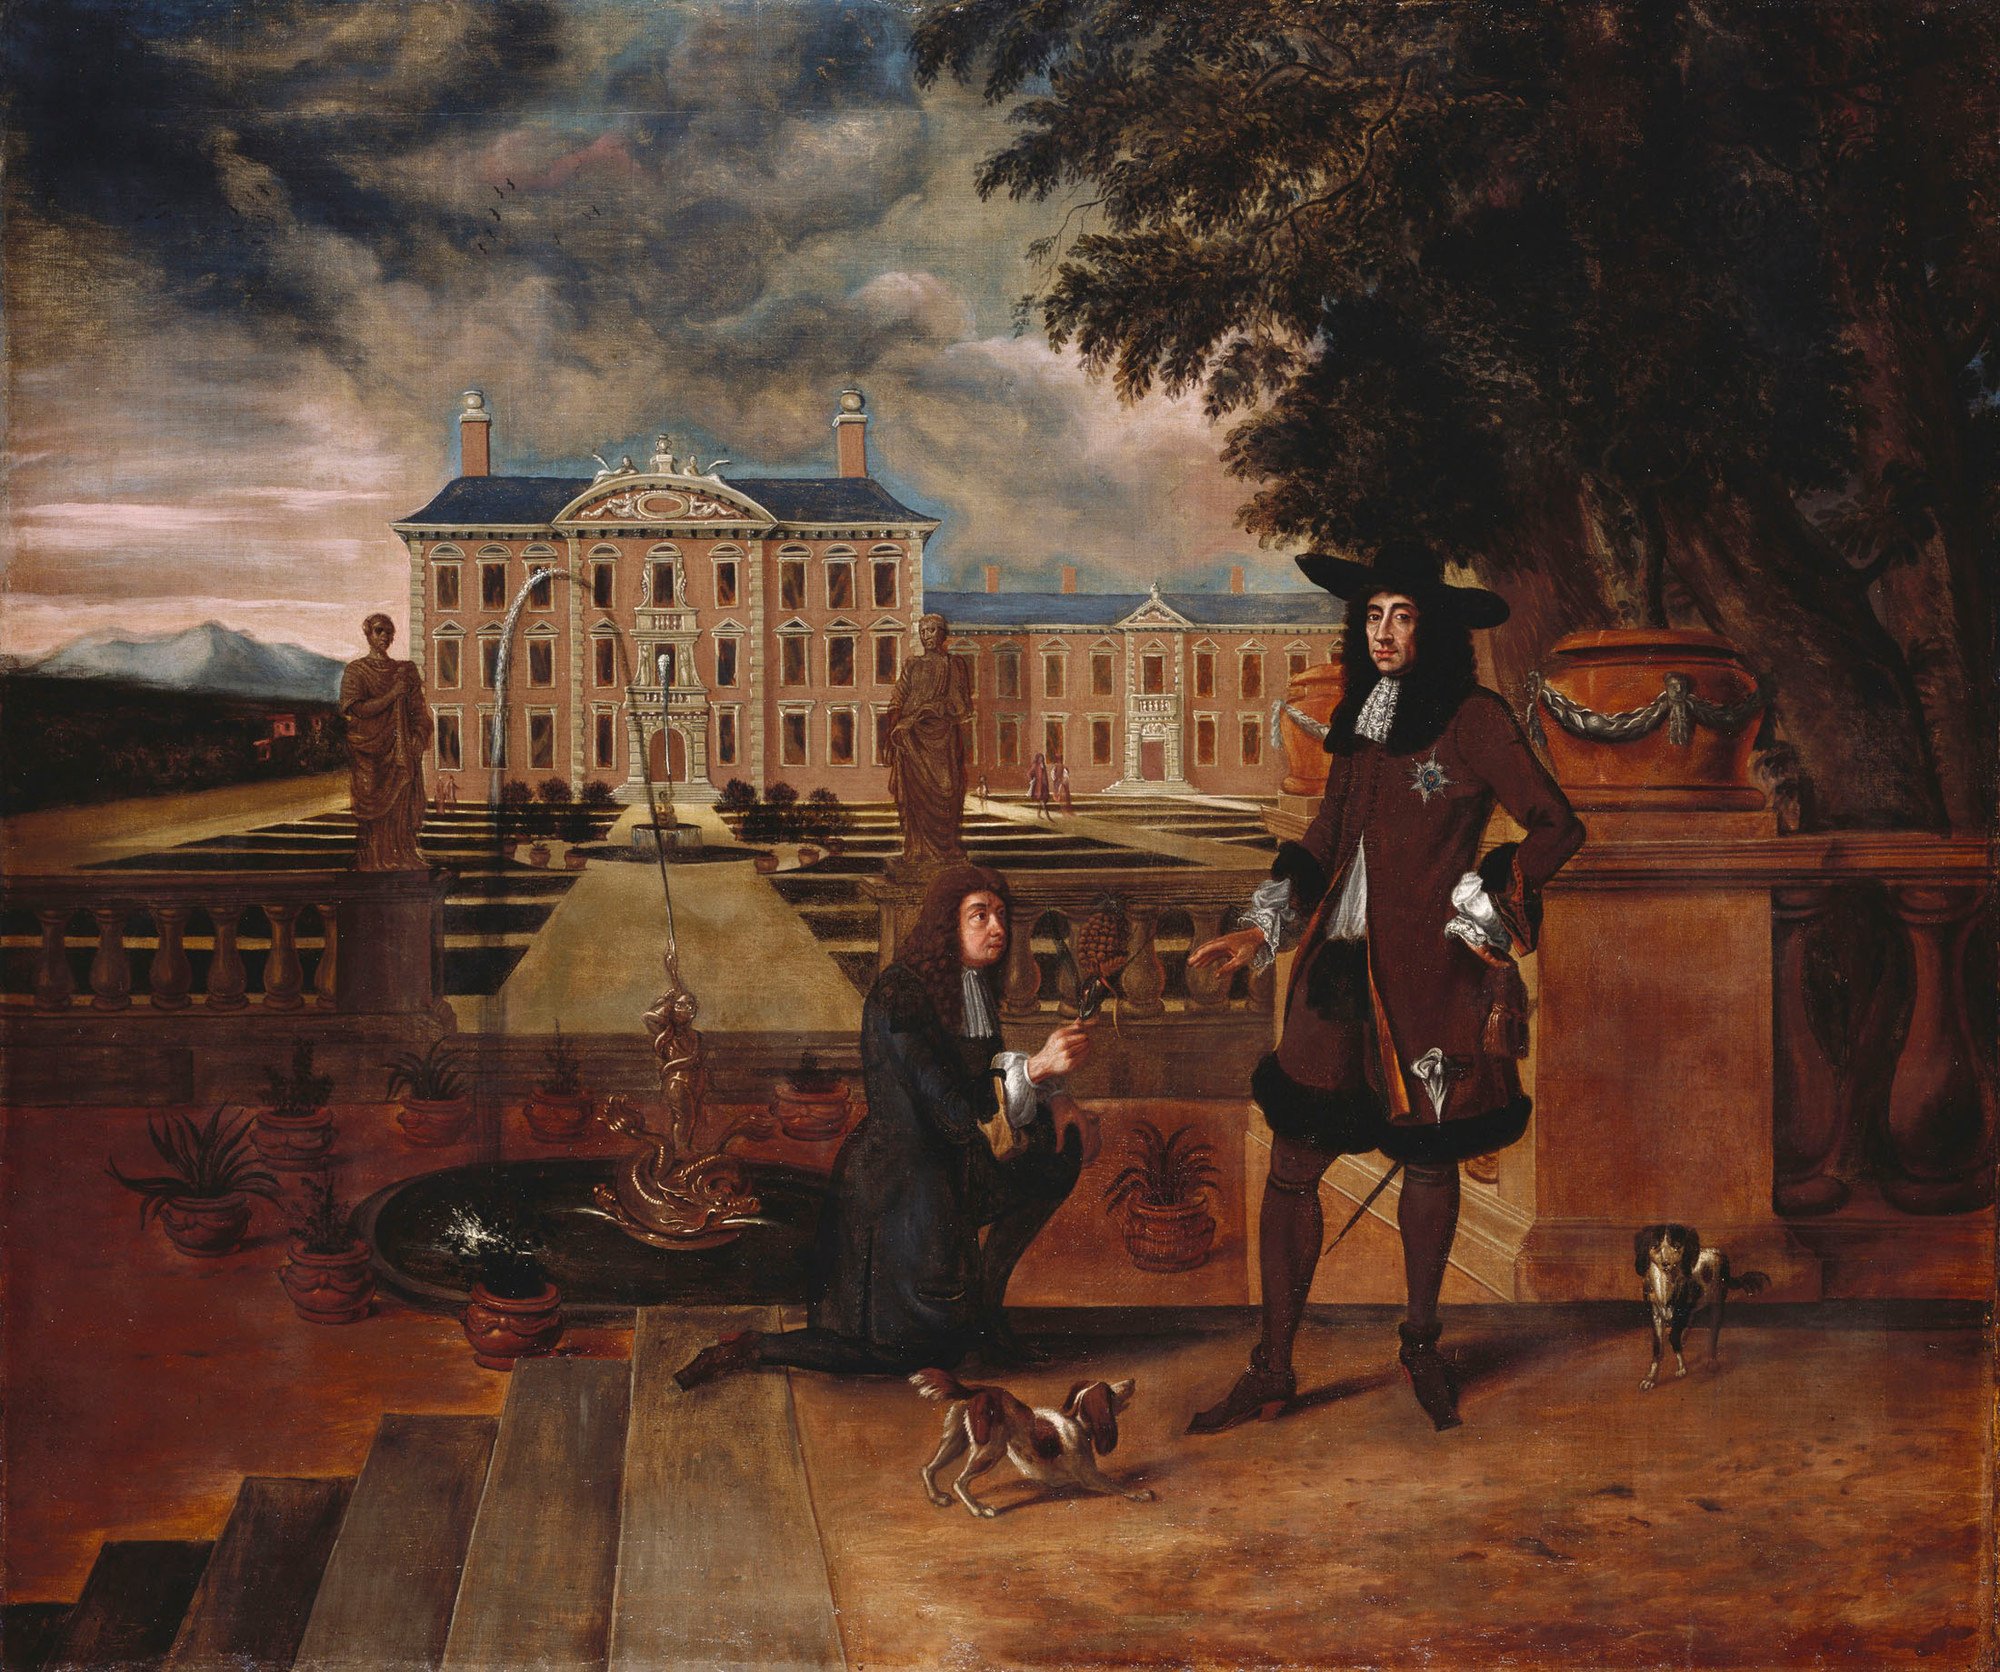 King Charles II receives a young pineapple in this portrait by Hendrick Danckerts